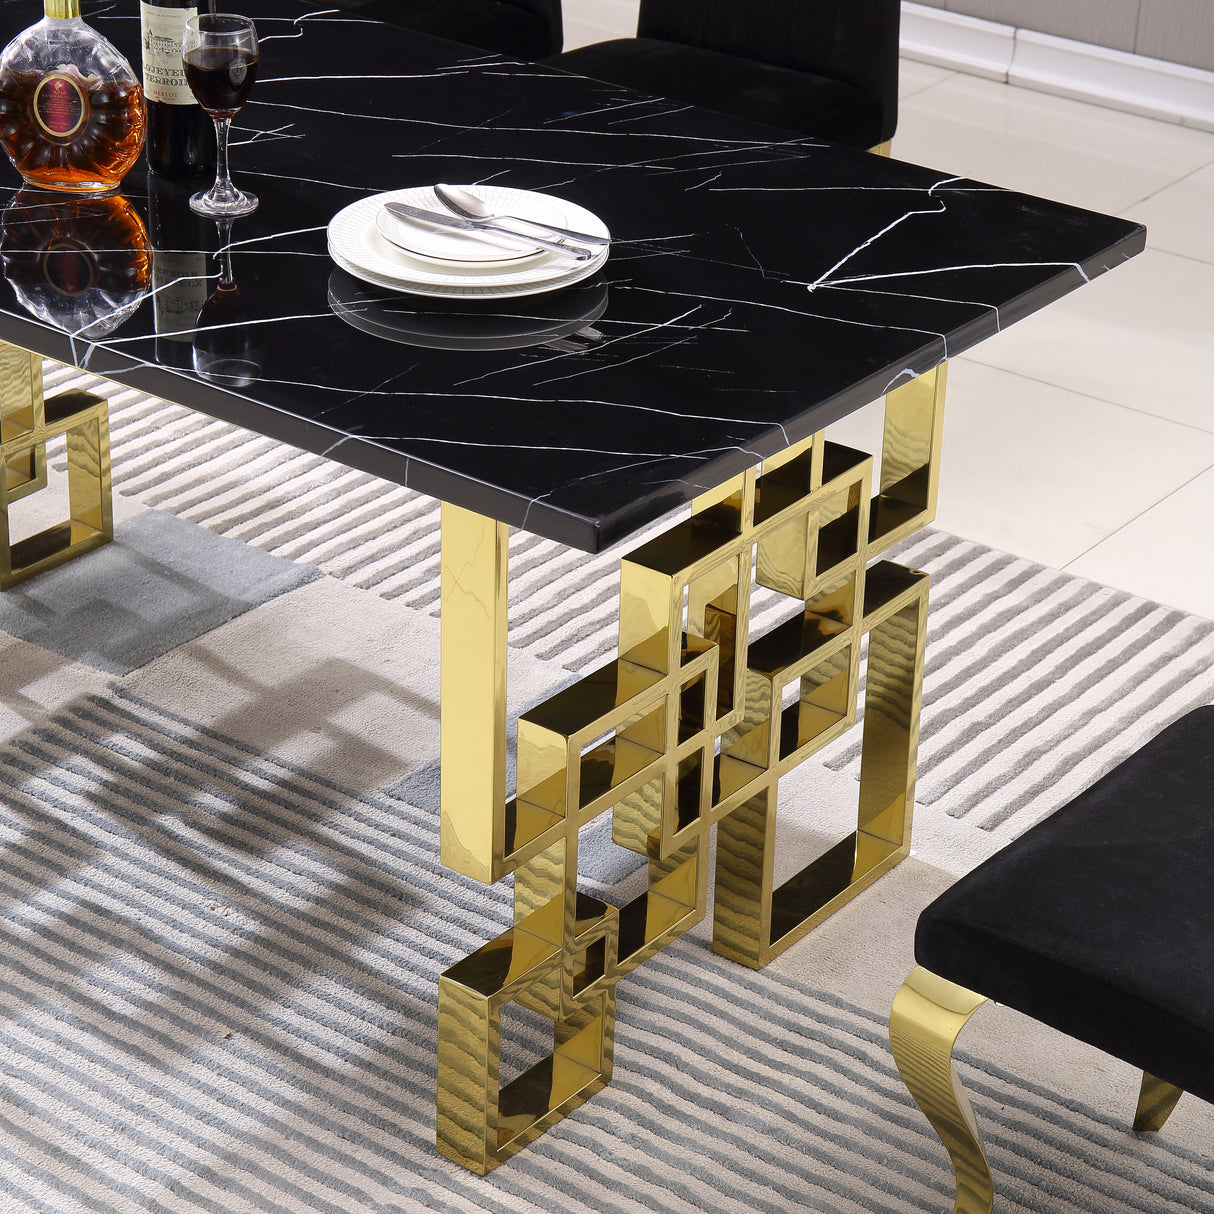 Contemporary Rectangular Marble Table, 0.71" Marble Top, Gold Mirrored Finish, Luxury Design For Home (63"x35.4"x29.5") - Home Elegance USA